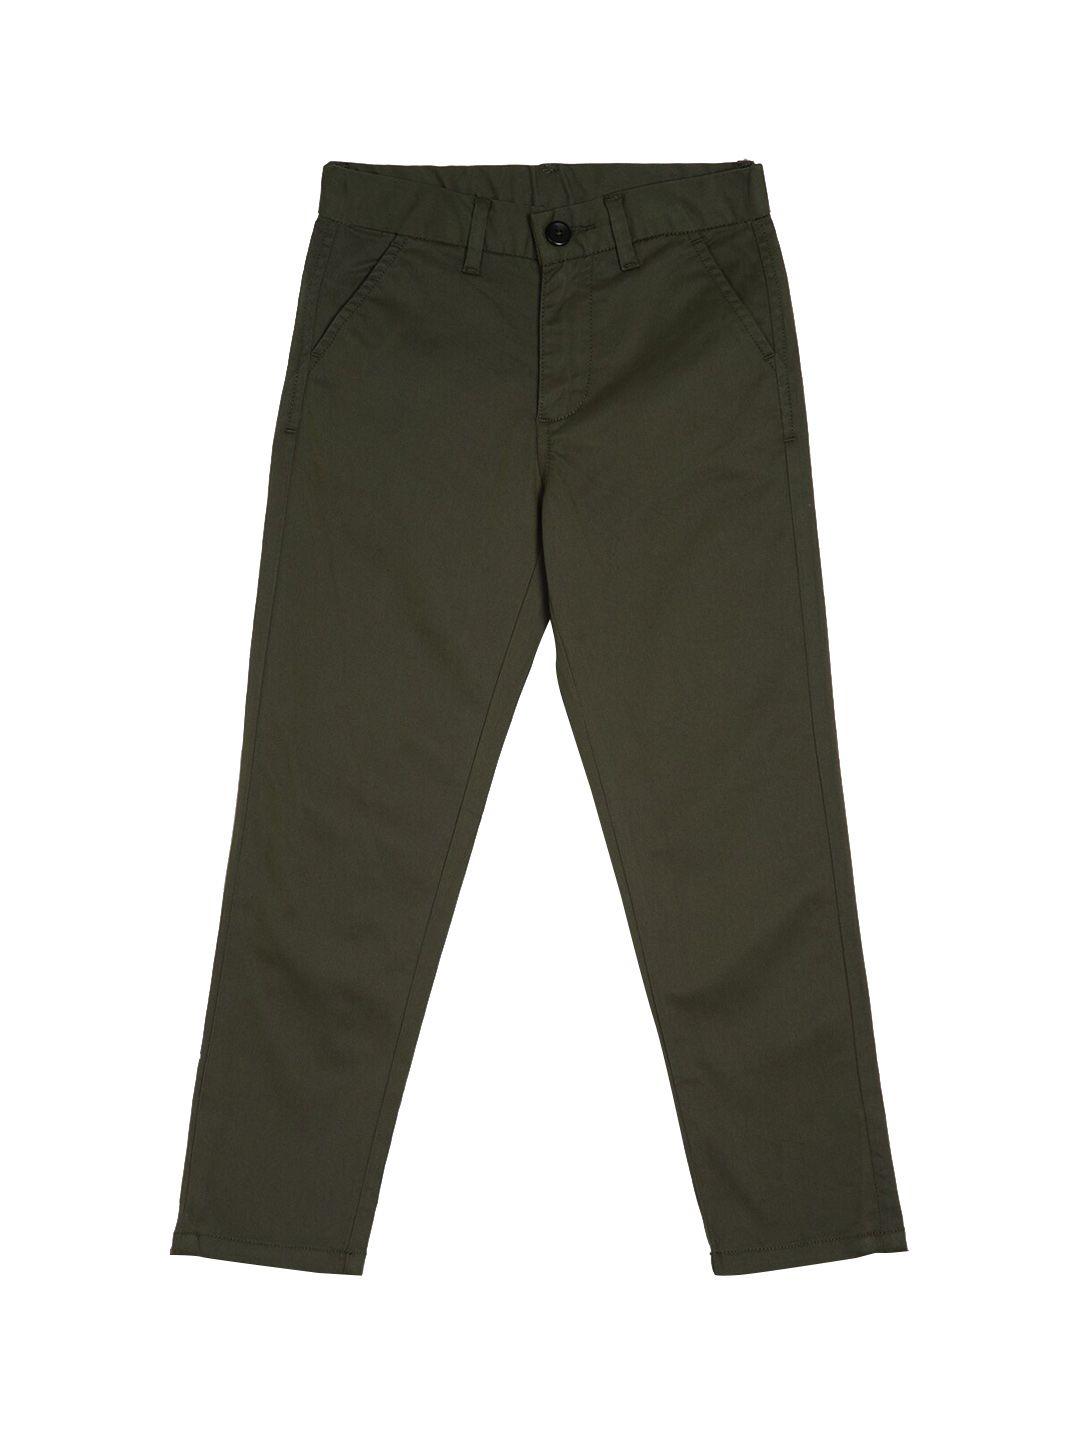 peter england boys olive green cotton chinos trousers